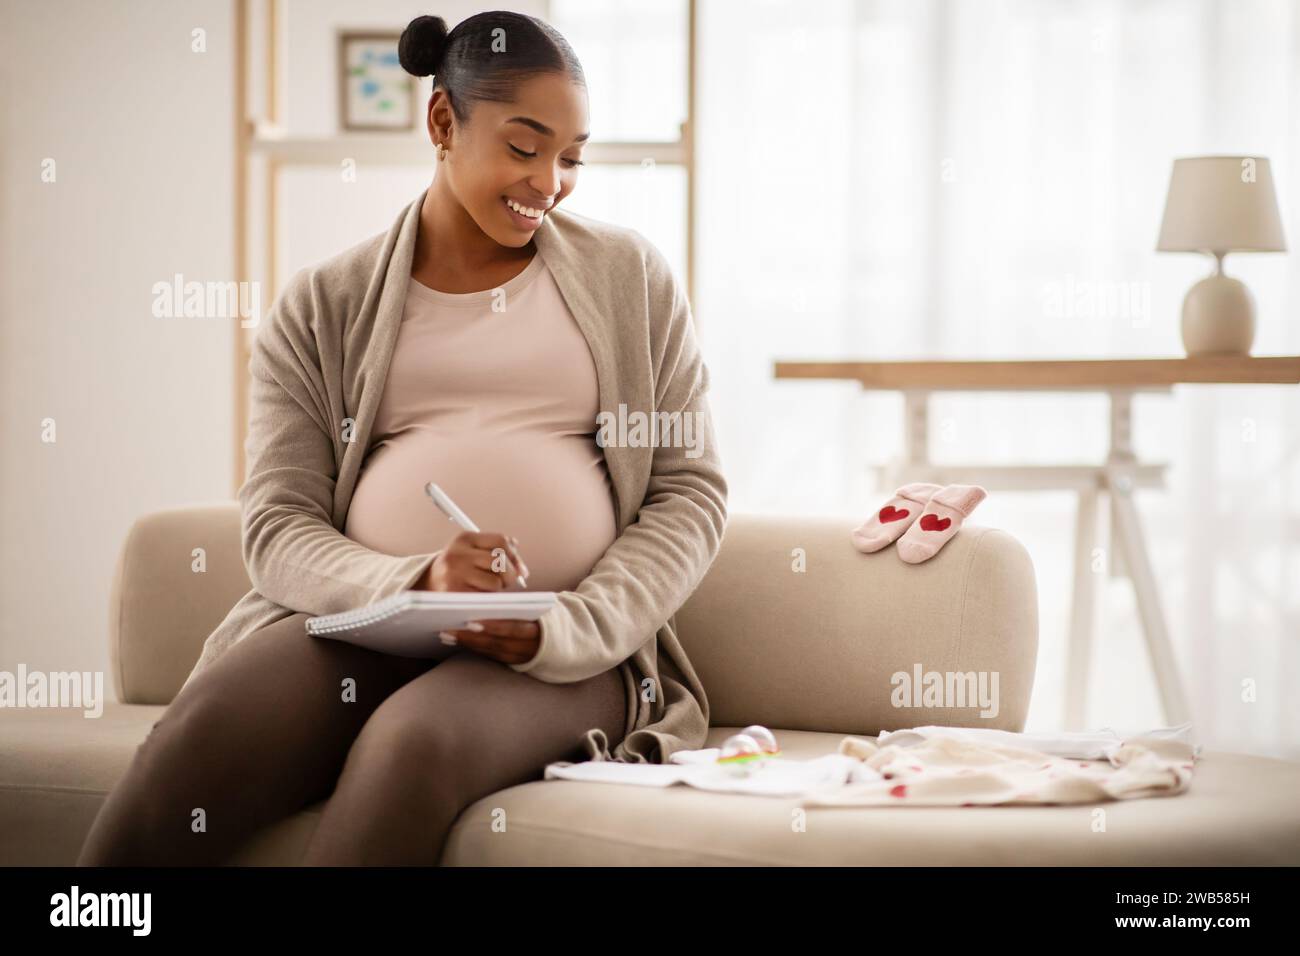 Pregnant black woman getting ready for the maternity hospital Stock Photo